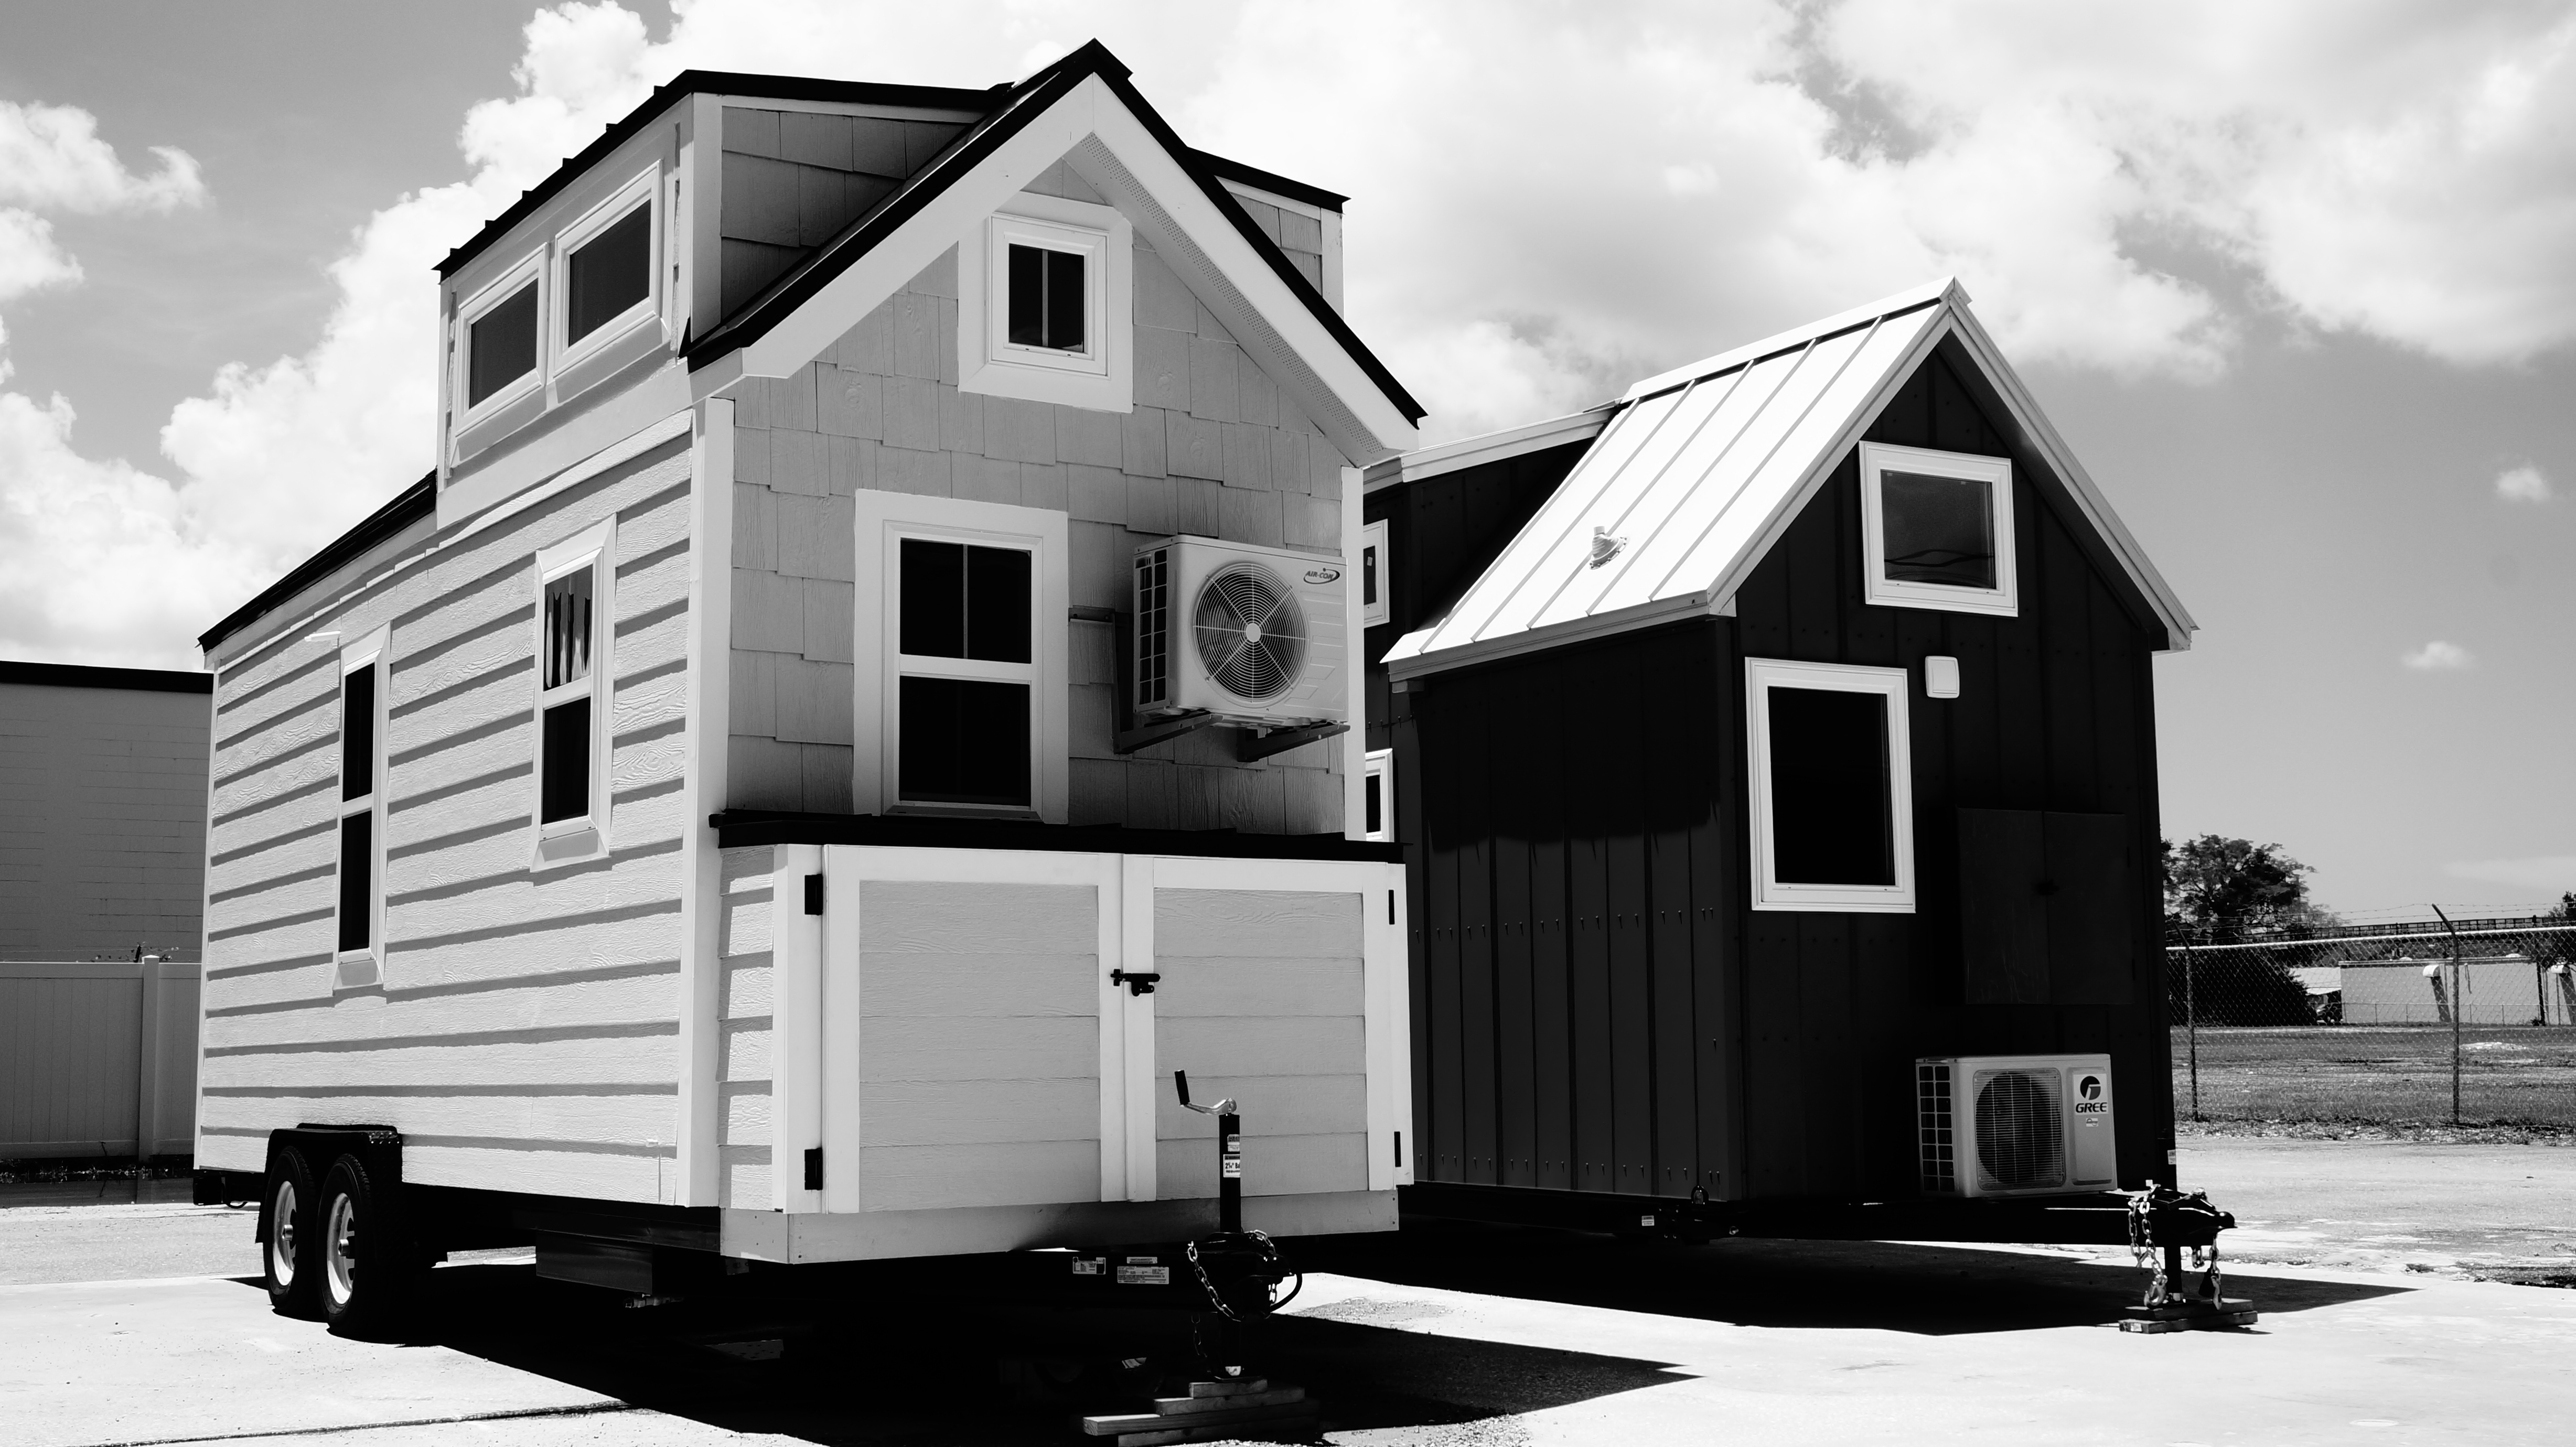 How Can You Save Money On Your Tiny Home Build?